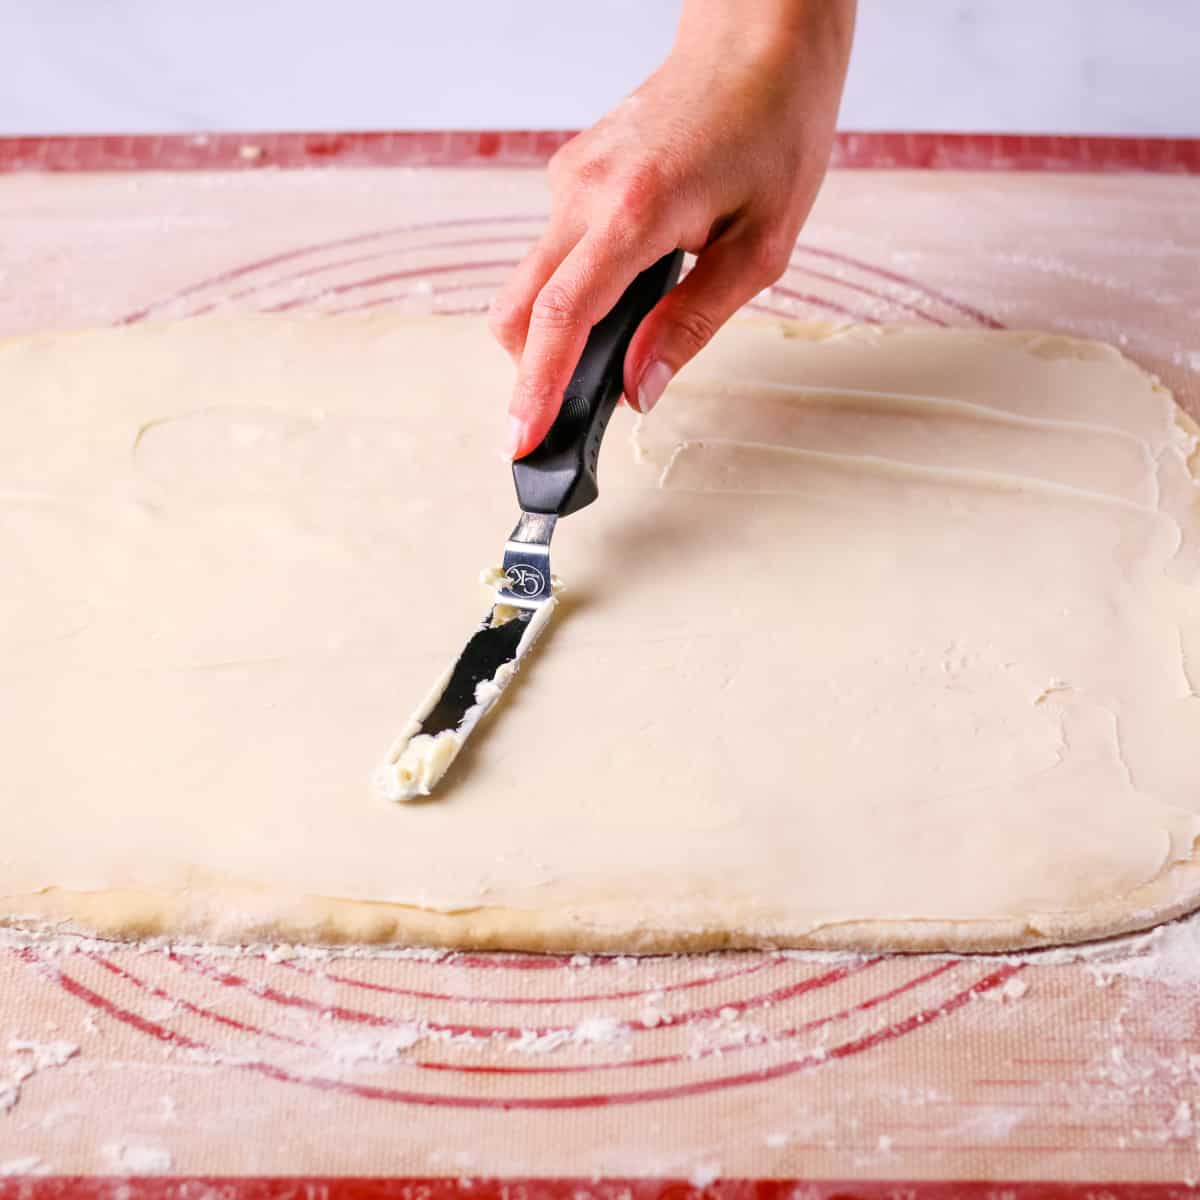 Spreading butter on top of the dough with a small metal spatula.